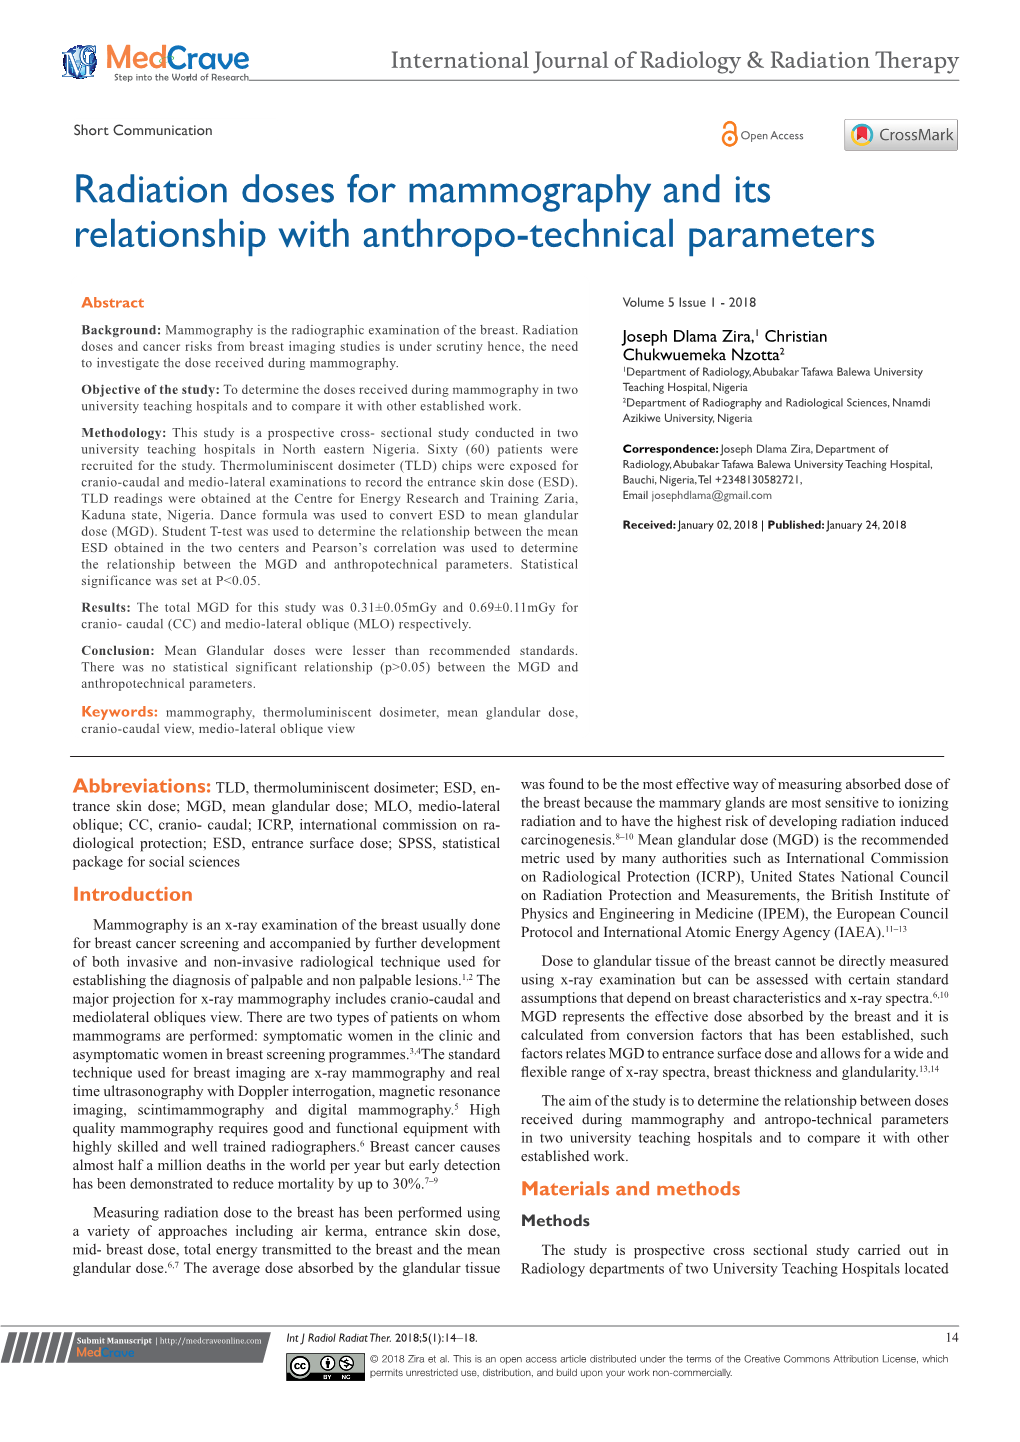 Radiation Doses for Mammography and Its Relationship with Anthropo-Technical Parameters